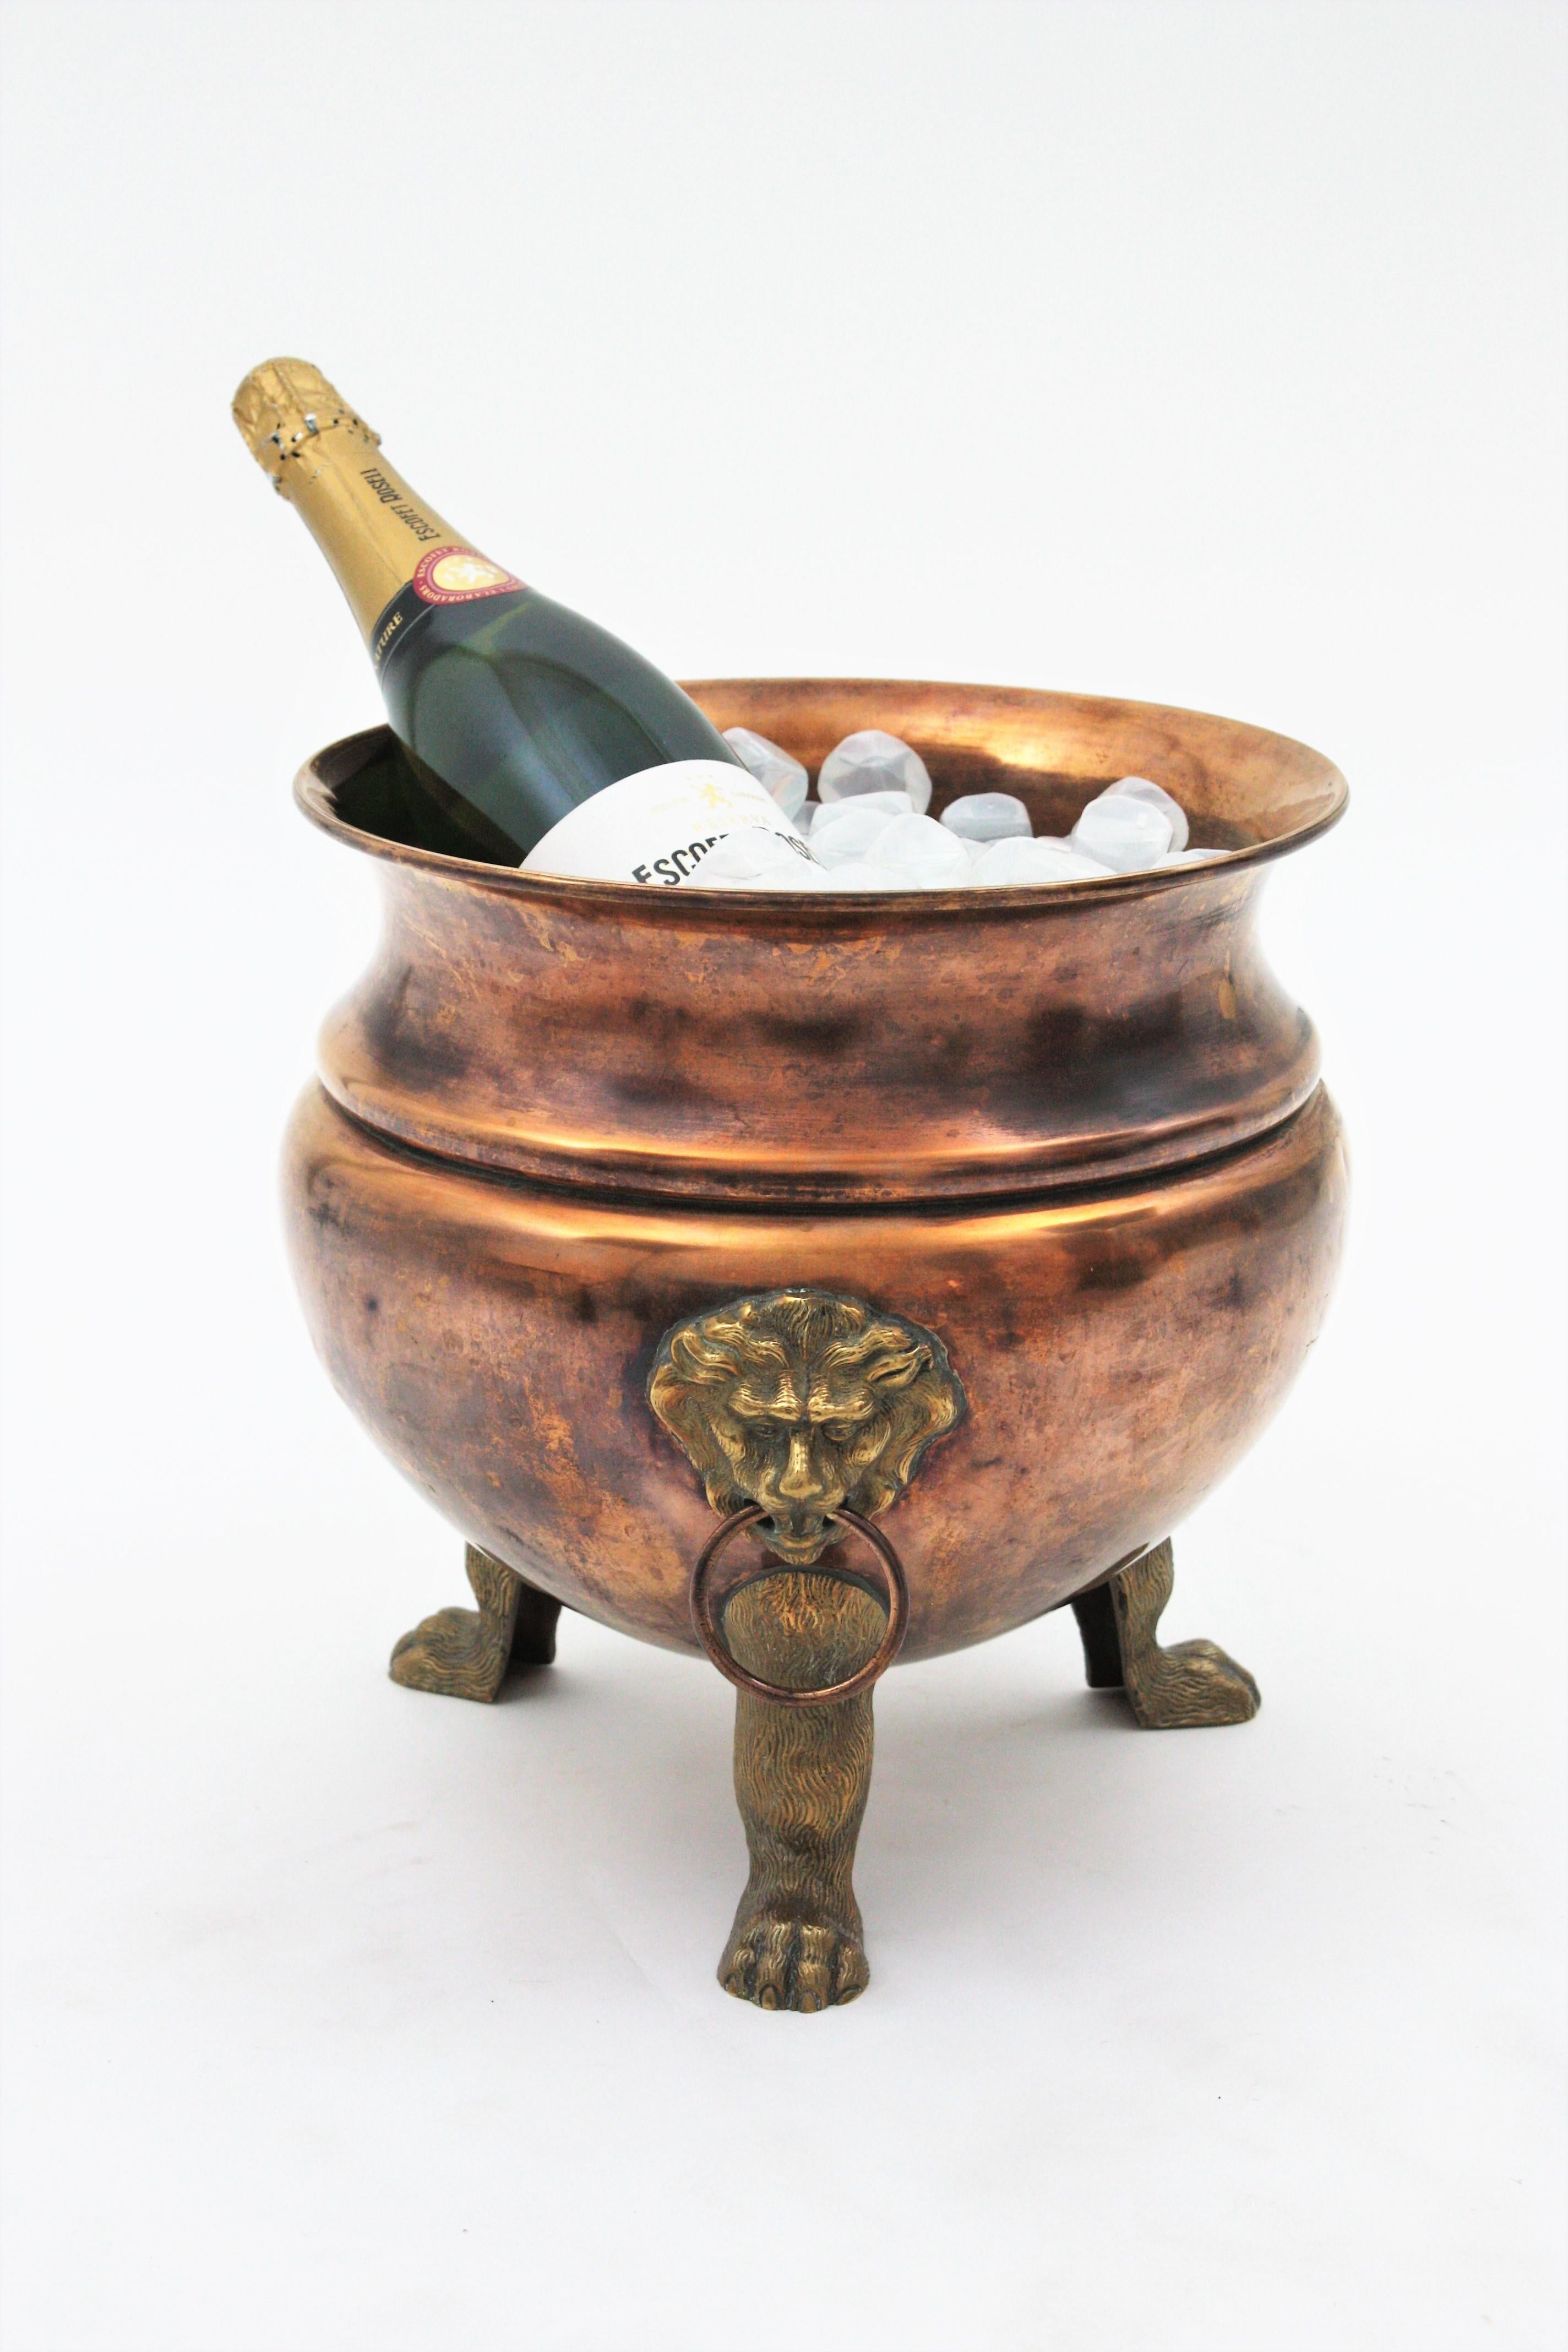 Copper and brass wine cooler or jardinière, Regency Style, England, 1930s
This round copper pot is finely executed in hand-hammered copper and it is supported by tripod paw feet. At both sides it has lion heads holding copper rings in their mouths